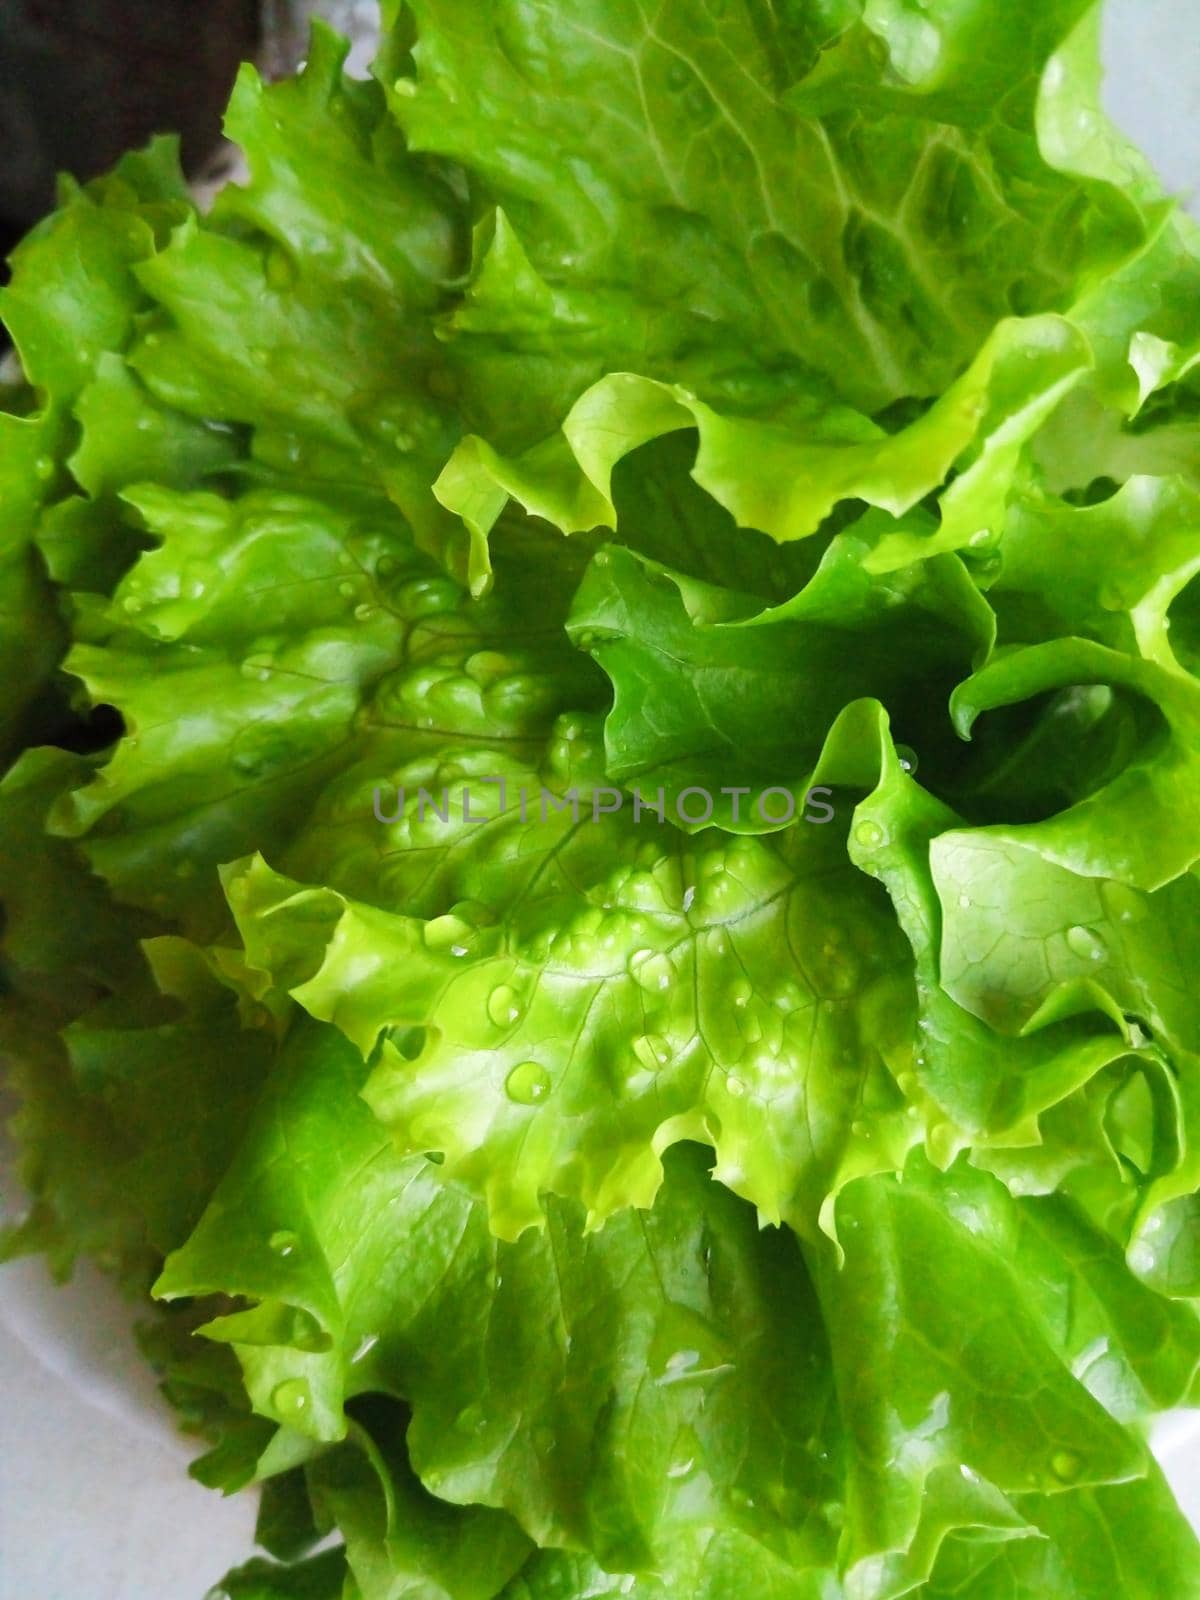 Green lettuce salad leaves and water drops close up image by lapushka62